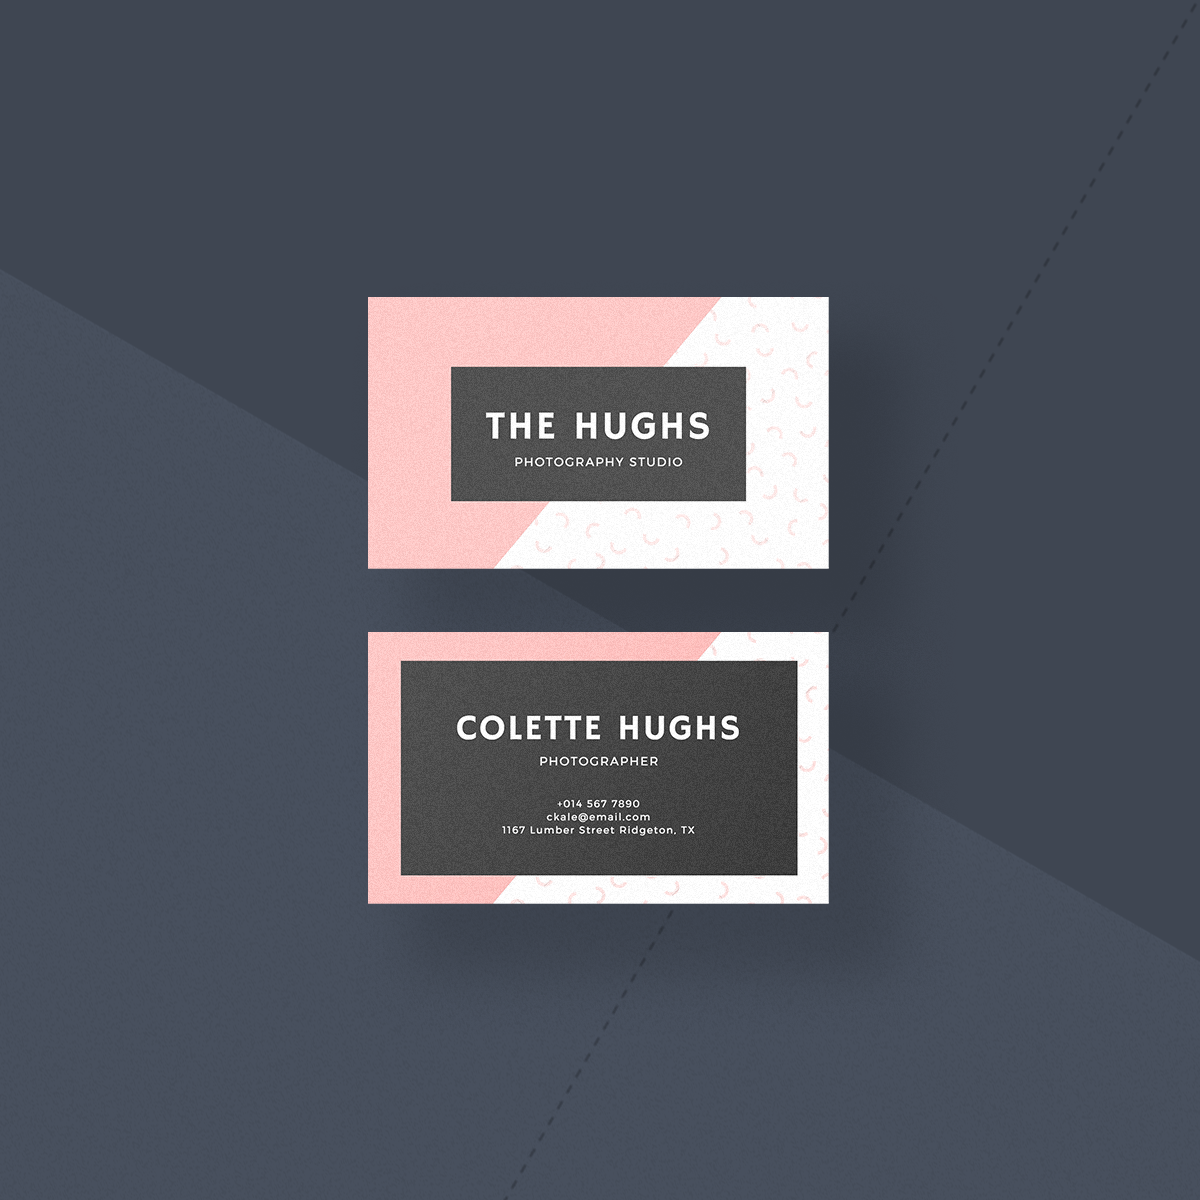 business-card-sizes-canva-s-design-wiki-size-guide-canva-s-design-wiki